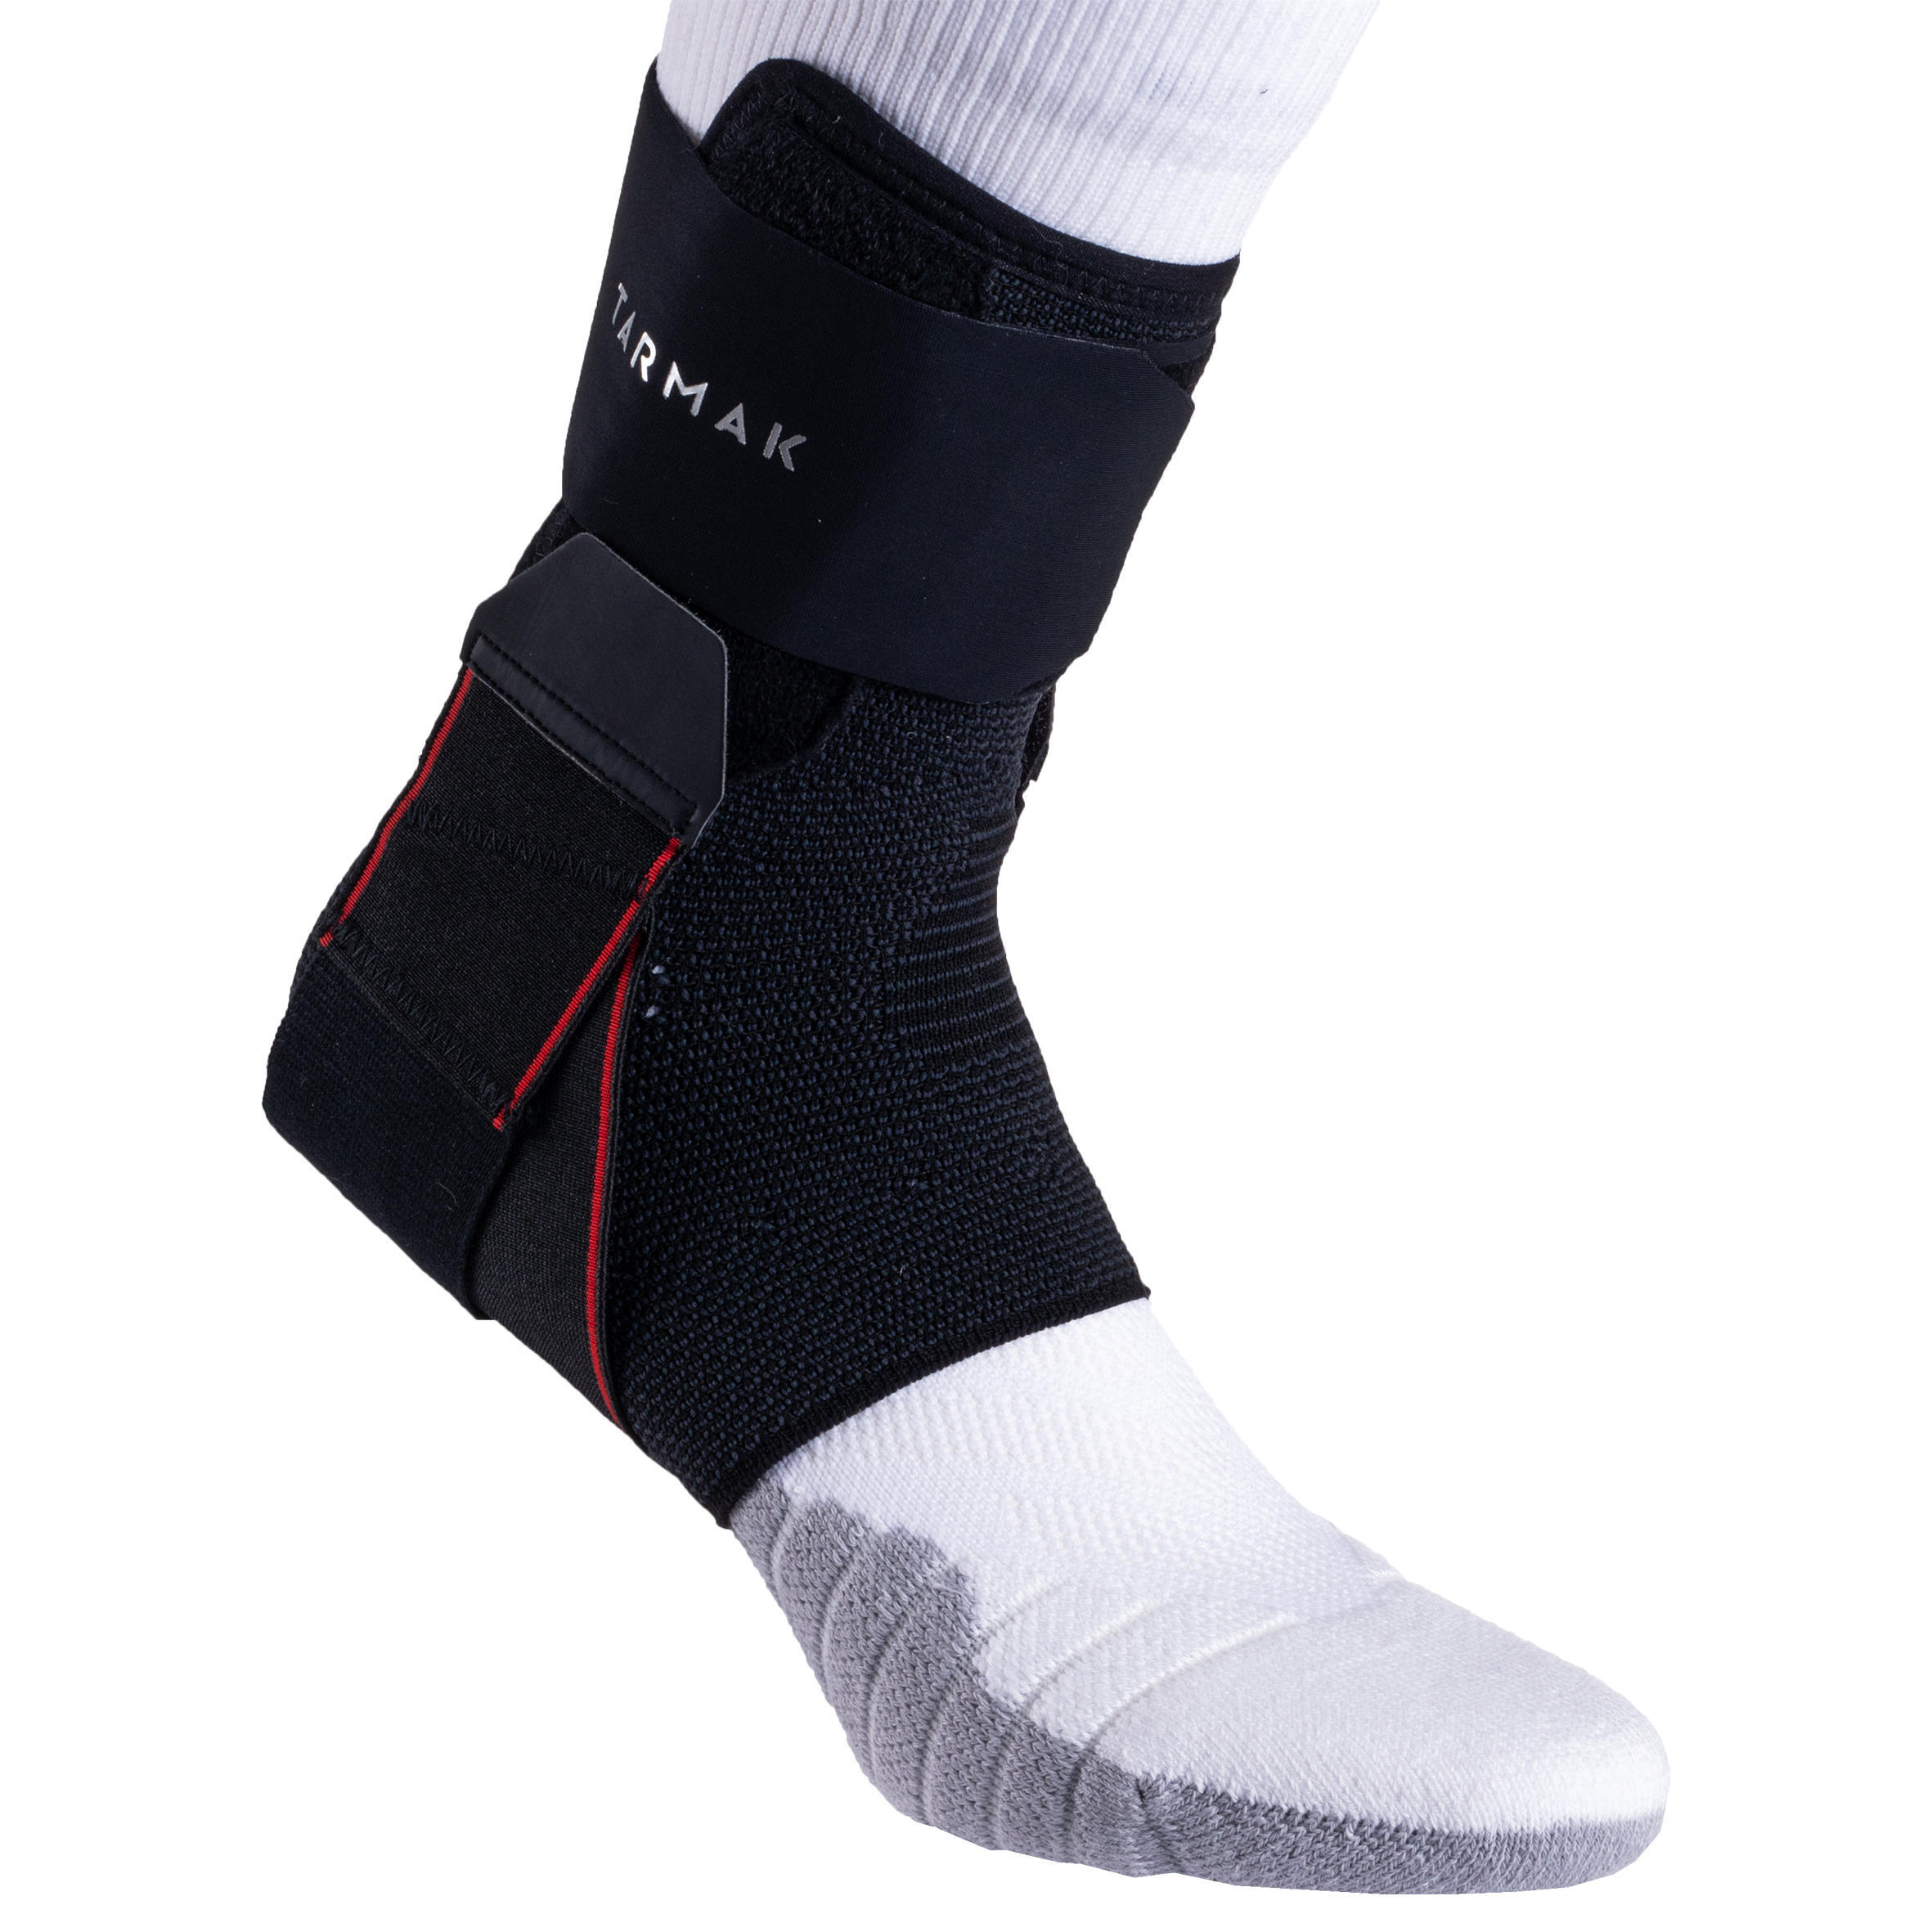 Strong 500 Men's/Women's Right/Left Ankle Ligament Support - Black 6/7